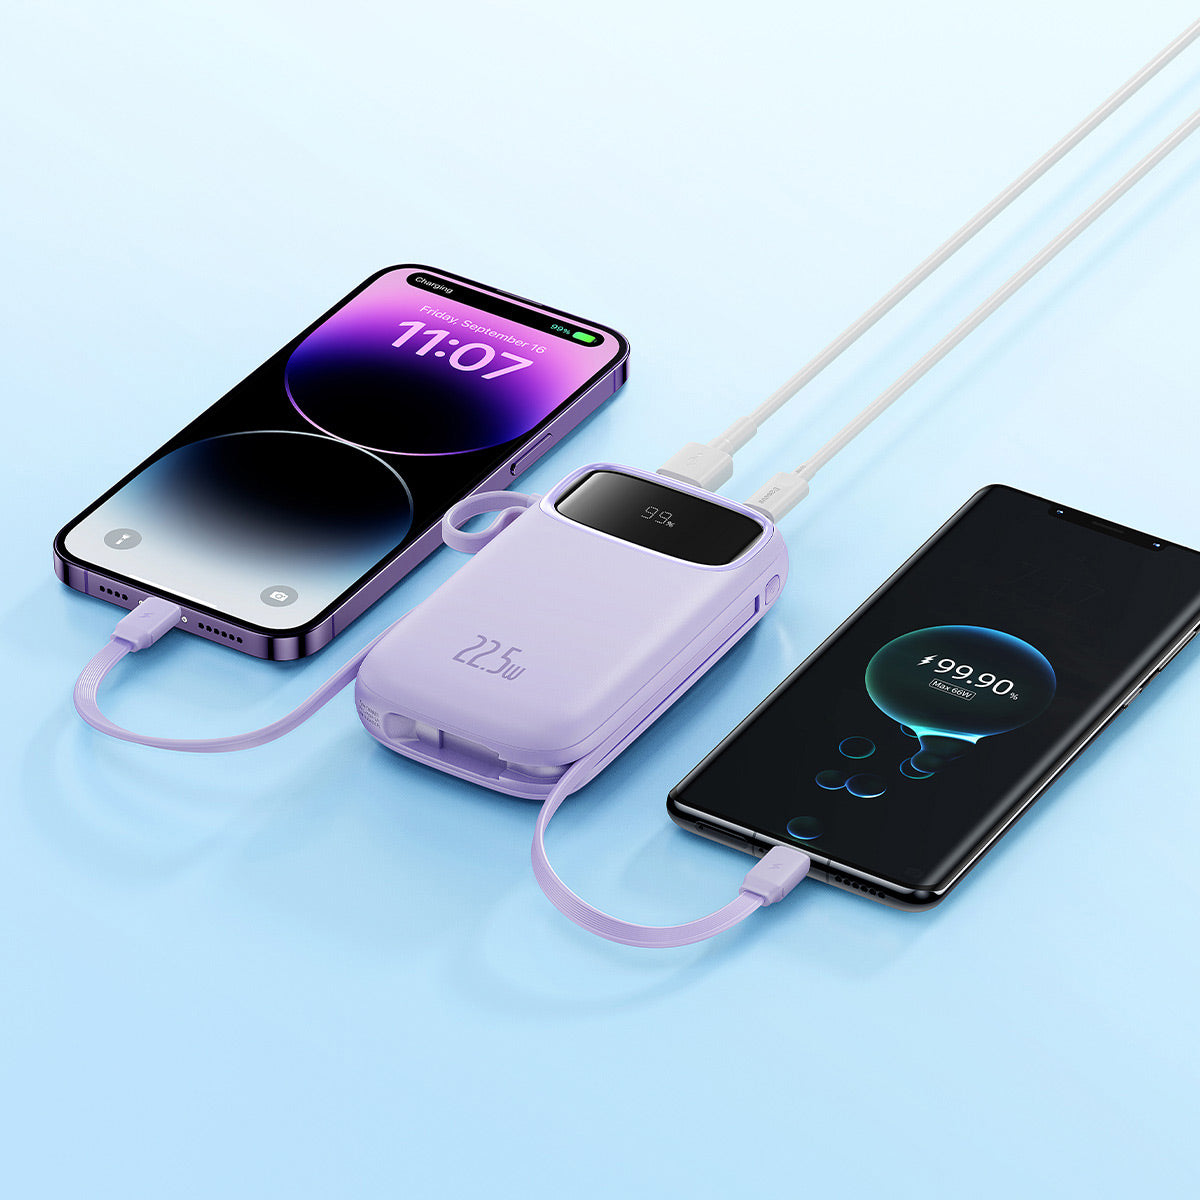 Baseus Qpow2 Power Bank 22.5W 10000mAh purple_charge 4 devices at once